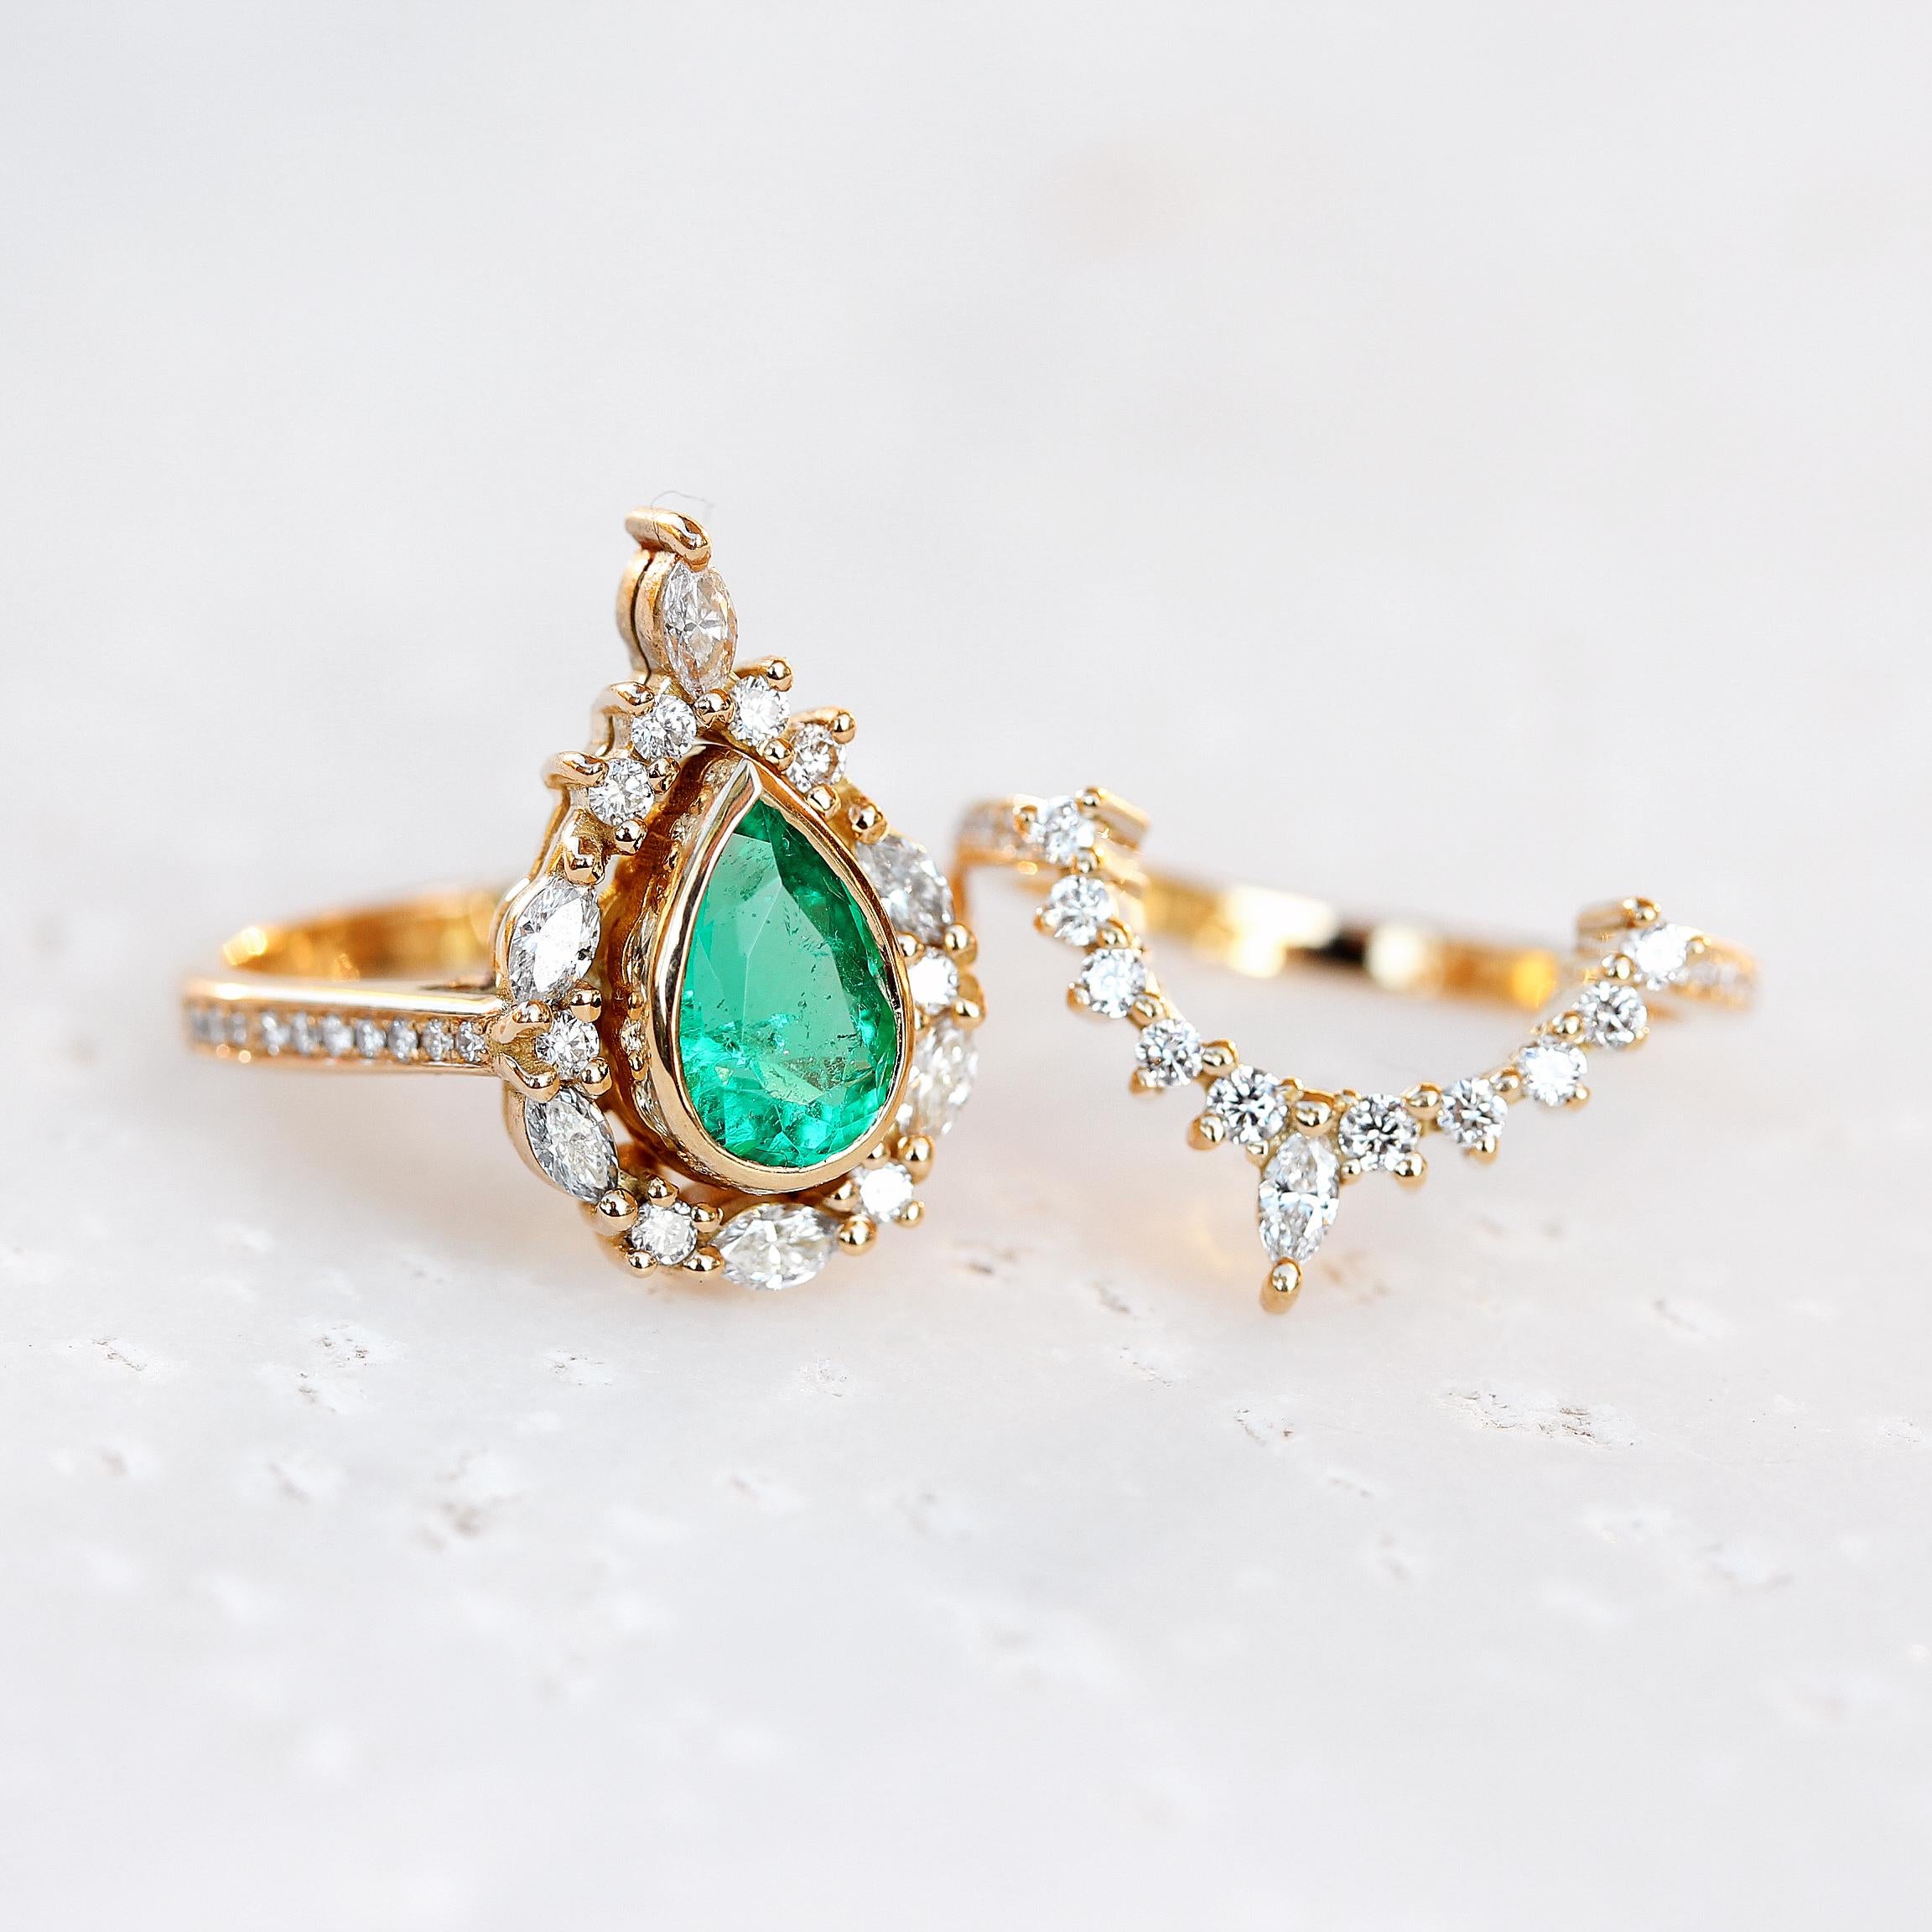 Pear shapes emerald with an outstanding diamond halo.
Beautiful and feminine bridal two-ring set - 